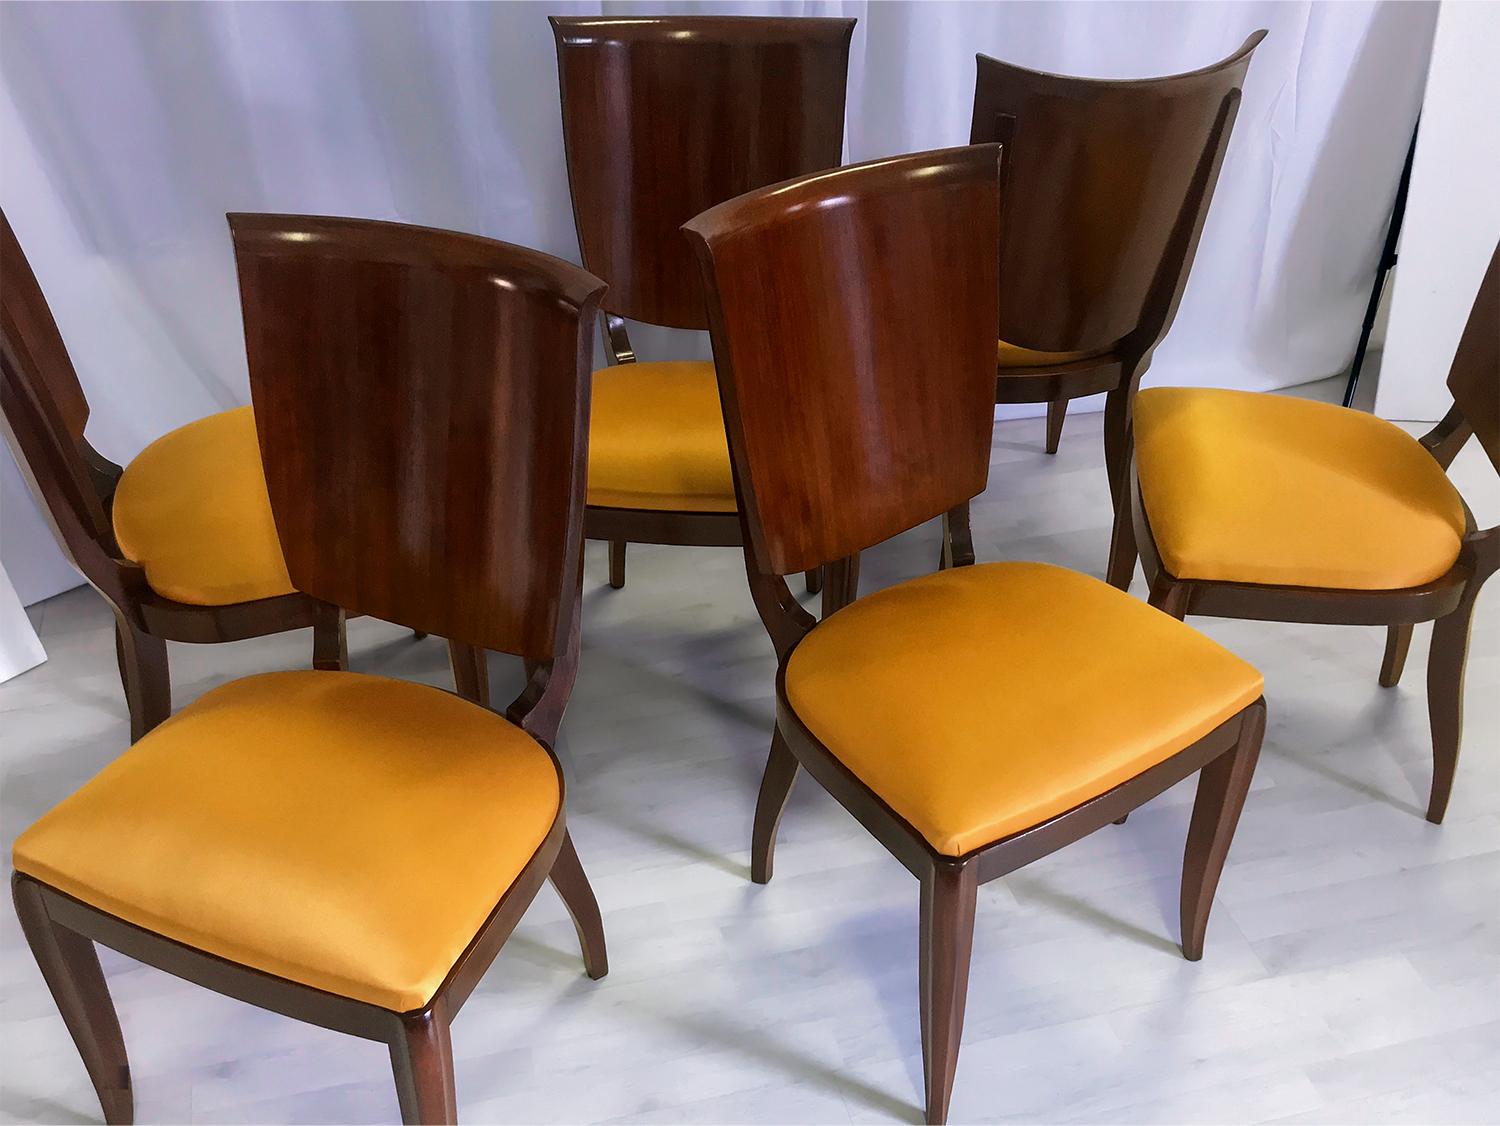 Mid-20th Century Italian Mid-Century Yellow Dining Chairs by Vittorio Dassi, Set of Six, 1950s For Sale